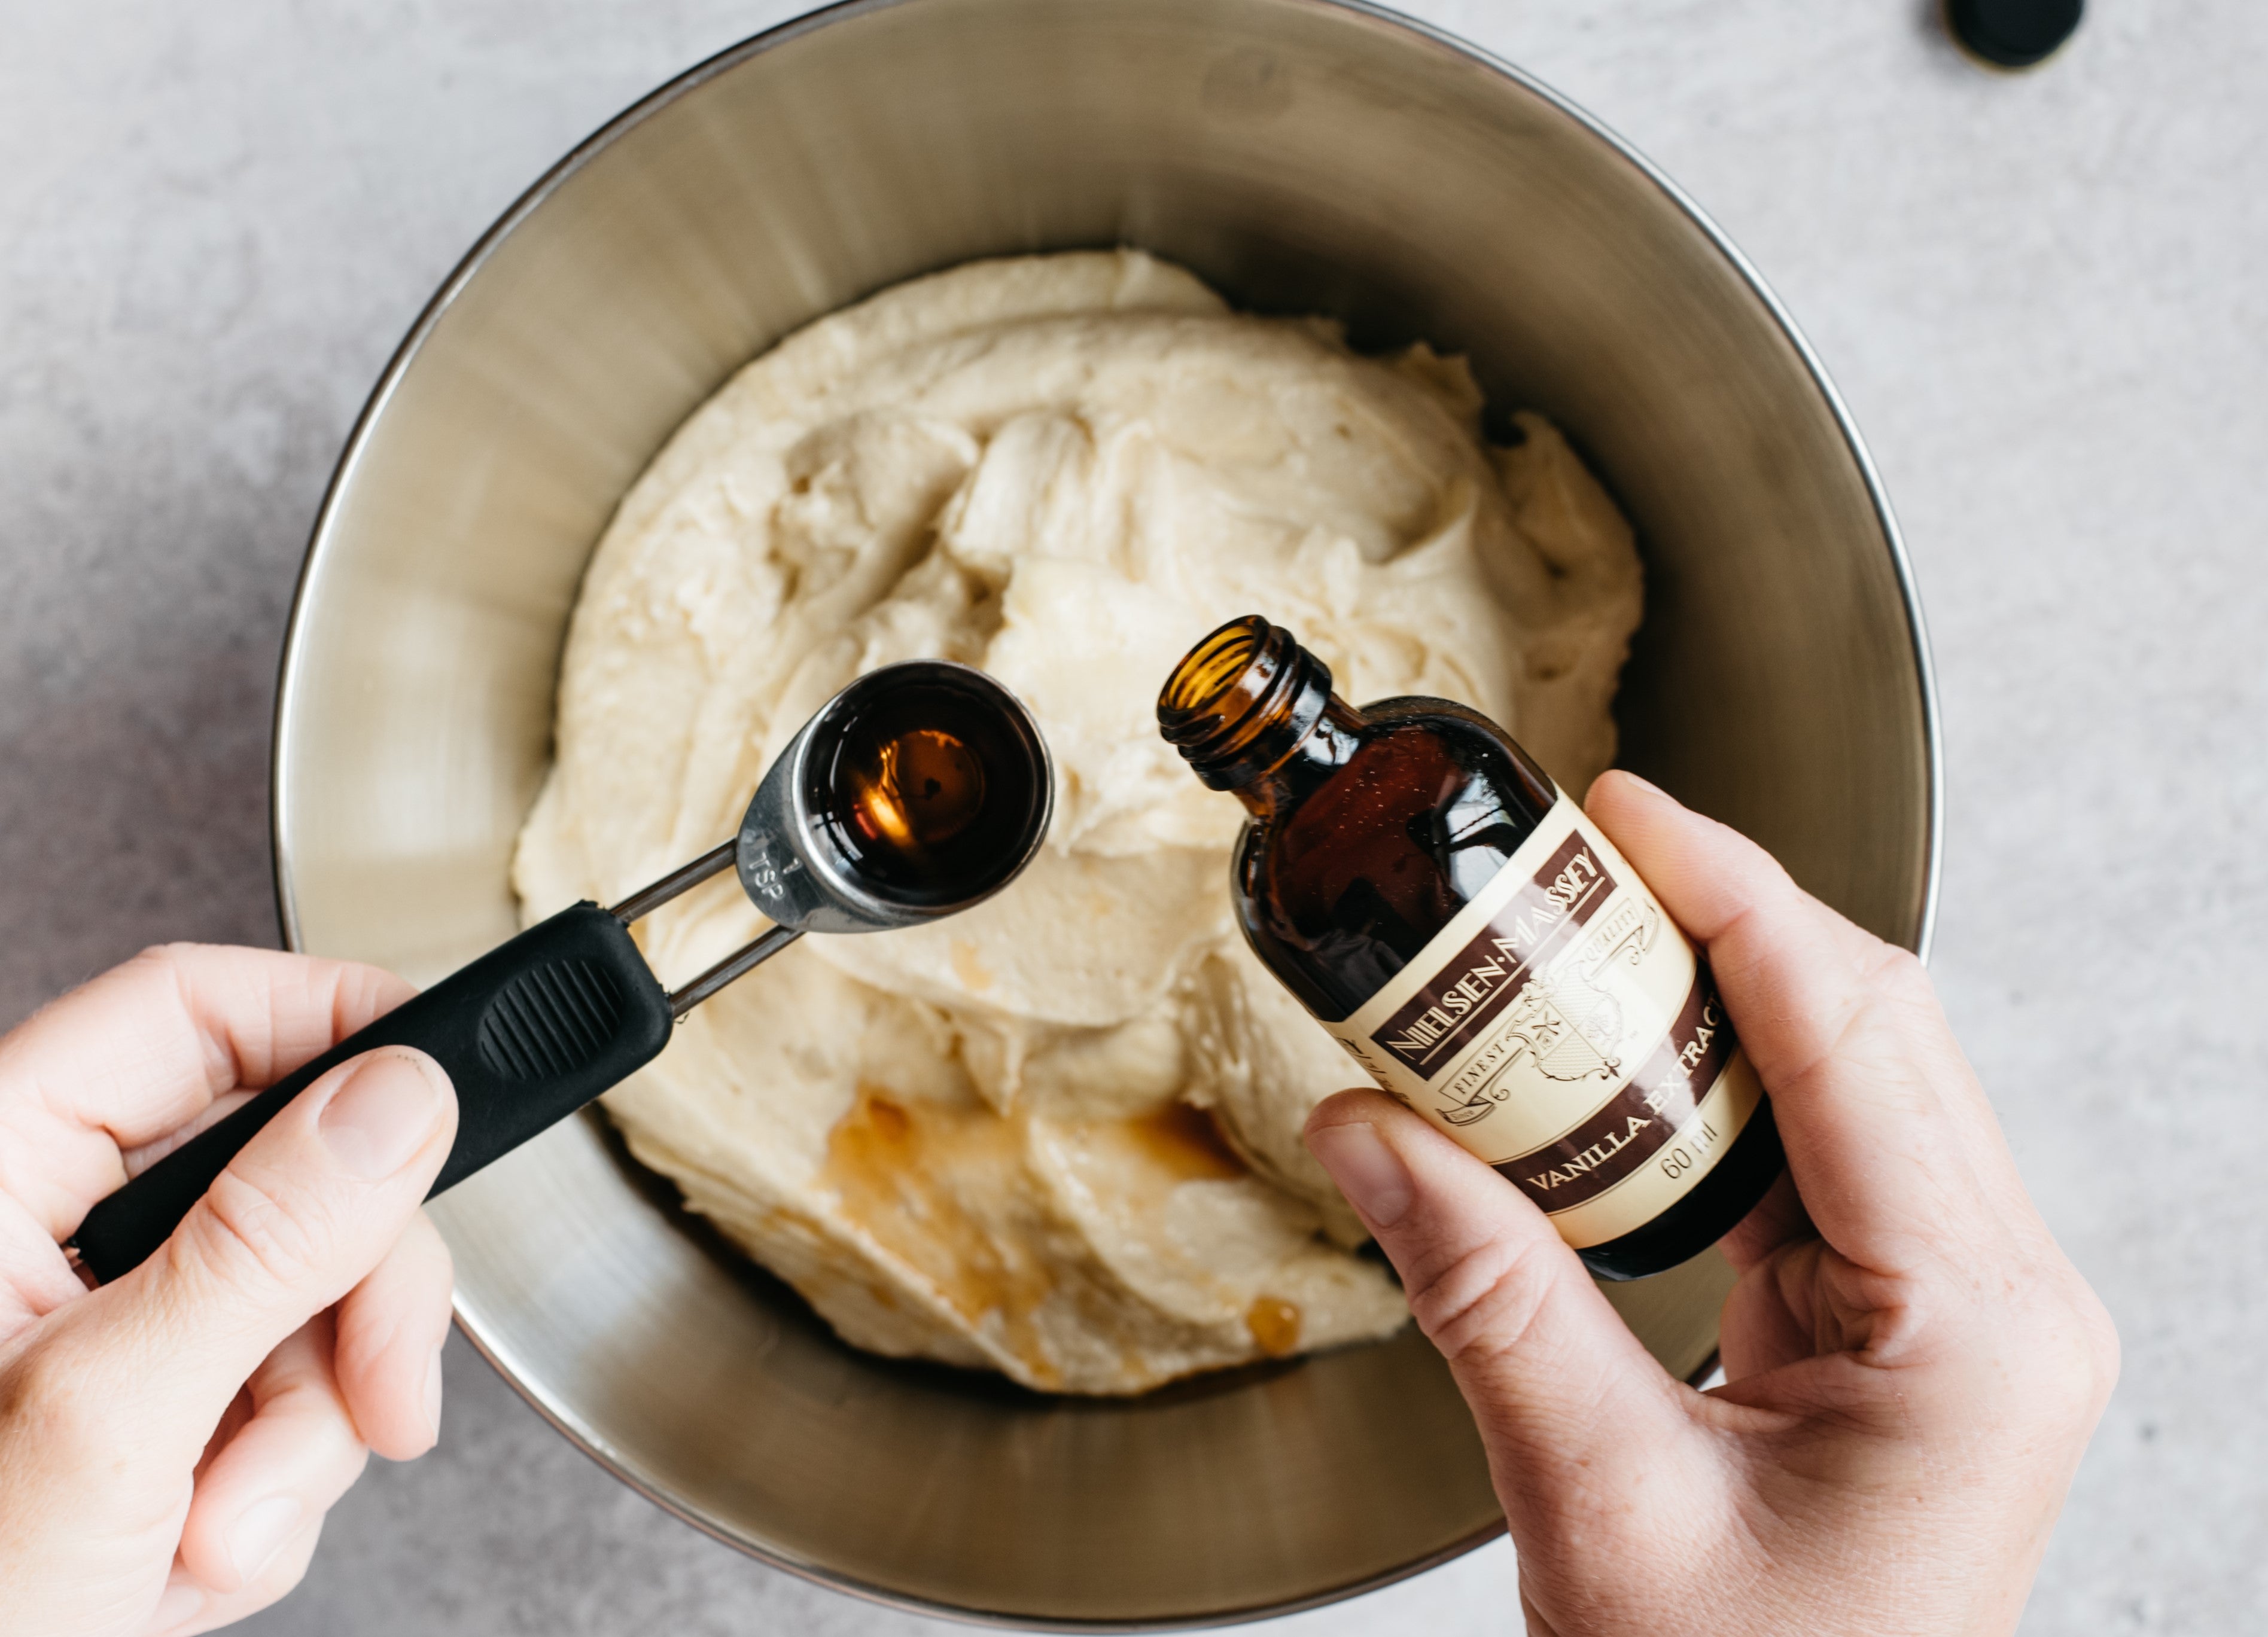 Your bake deserves only the finest flavouring.